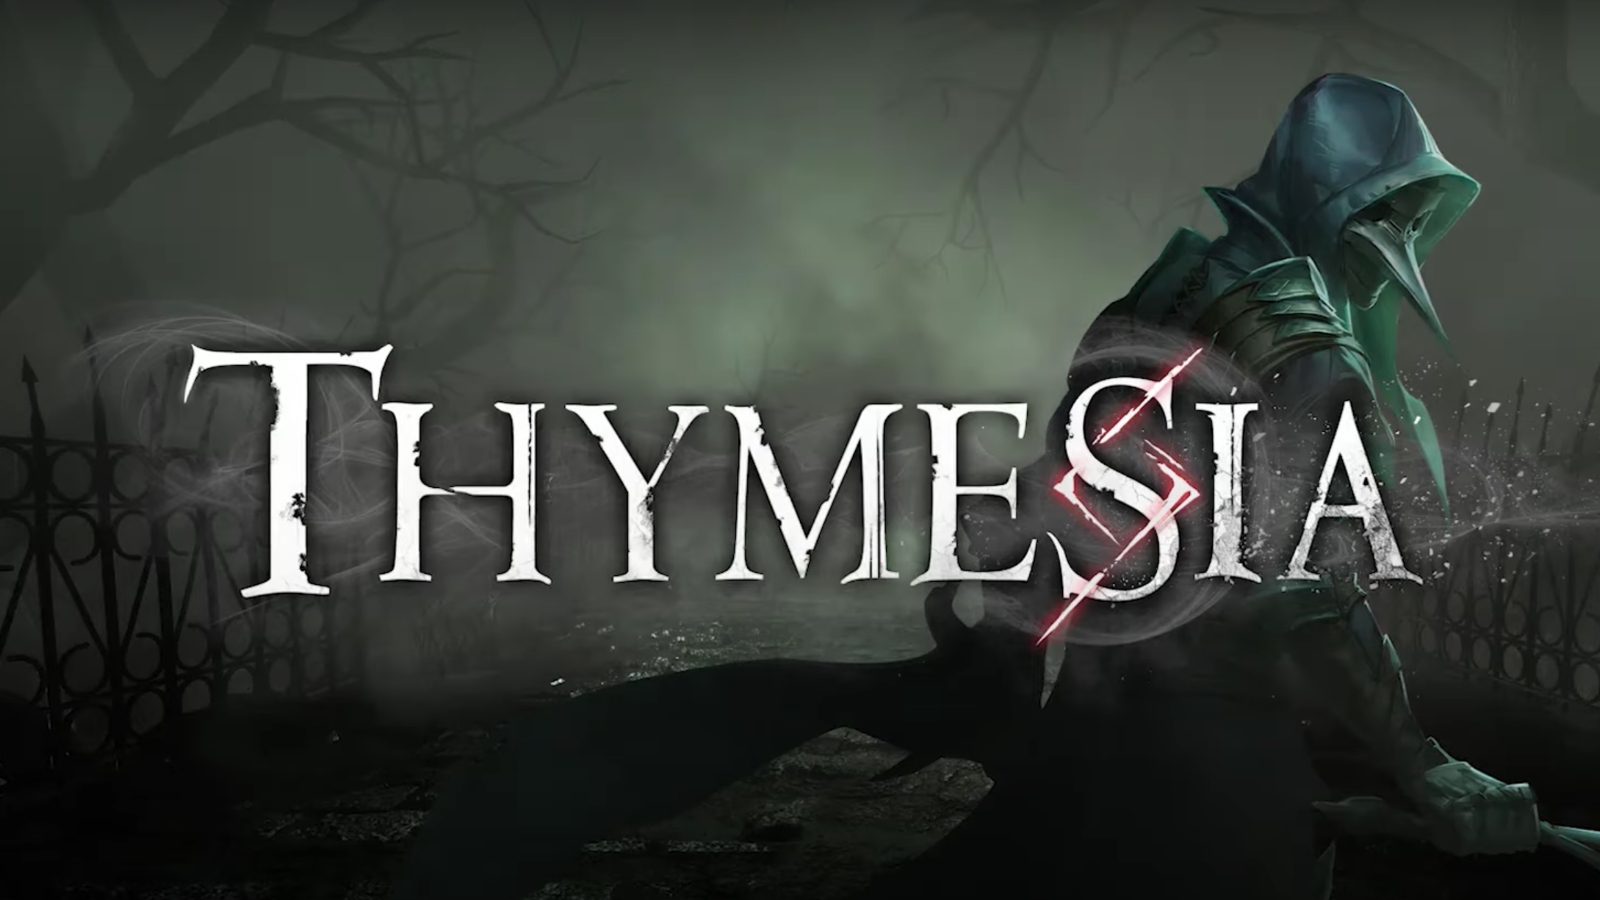 Action RPG Thymesia To Release On PC And Consoles In 2022